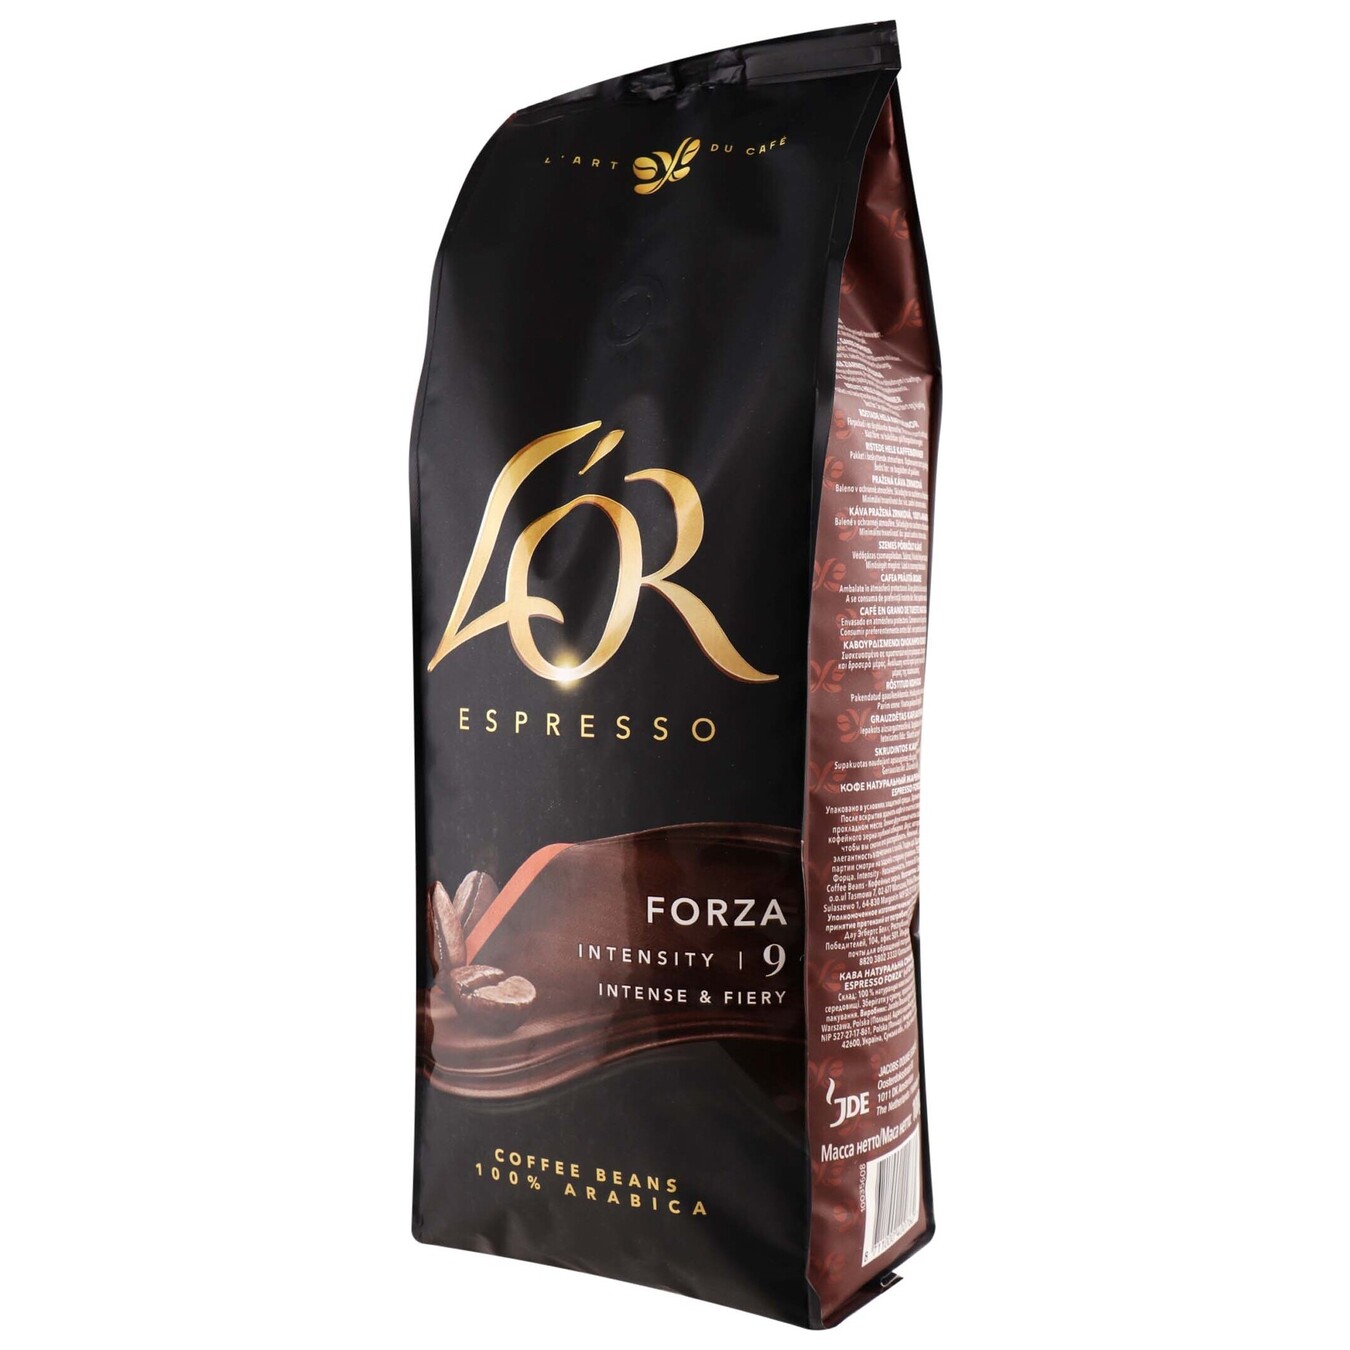 L'OR natural roasted Espresso Forza coffee beans 1000g 2